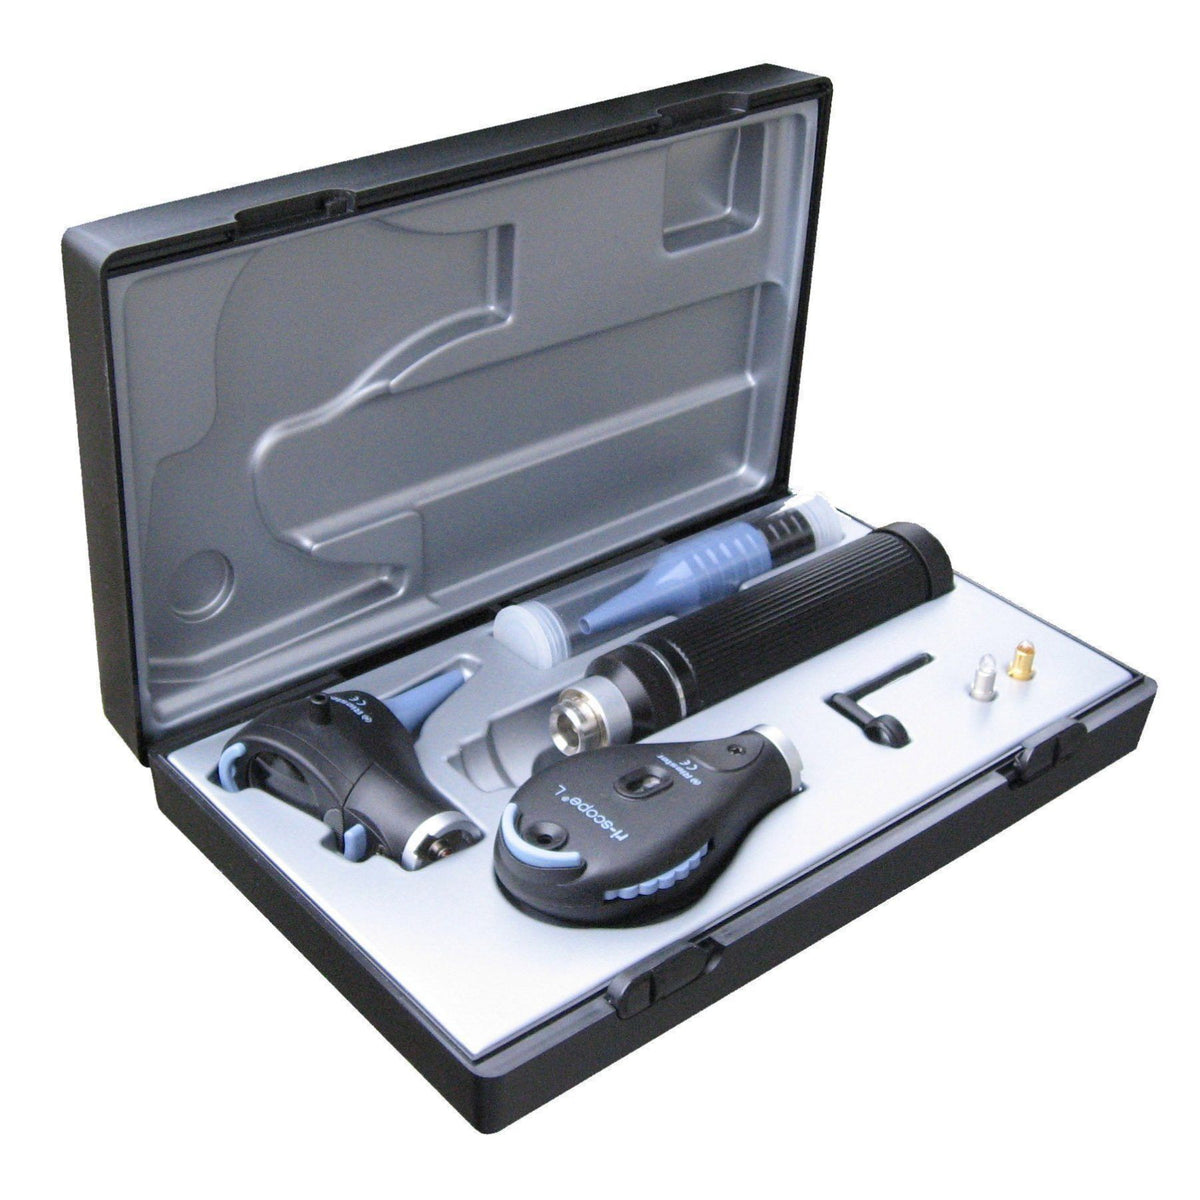 Riester Ri-Scope L Otoscope / Ophthalmoscope L2/L2 LED 3.5 V C Handle for 2 x Lithium Batteries